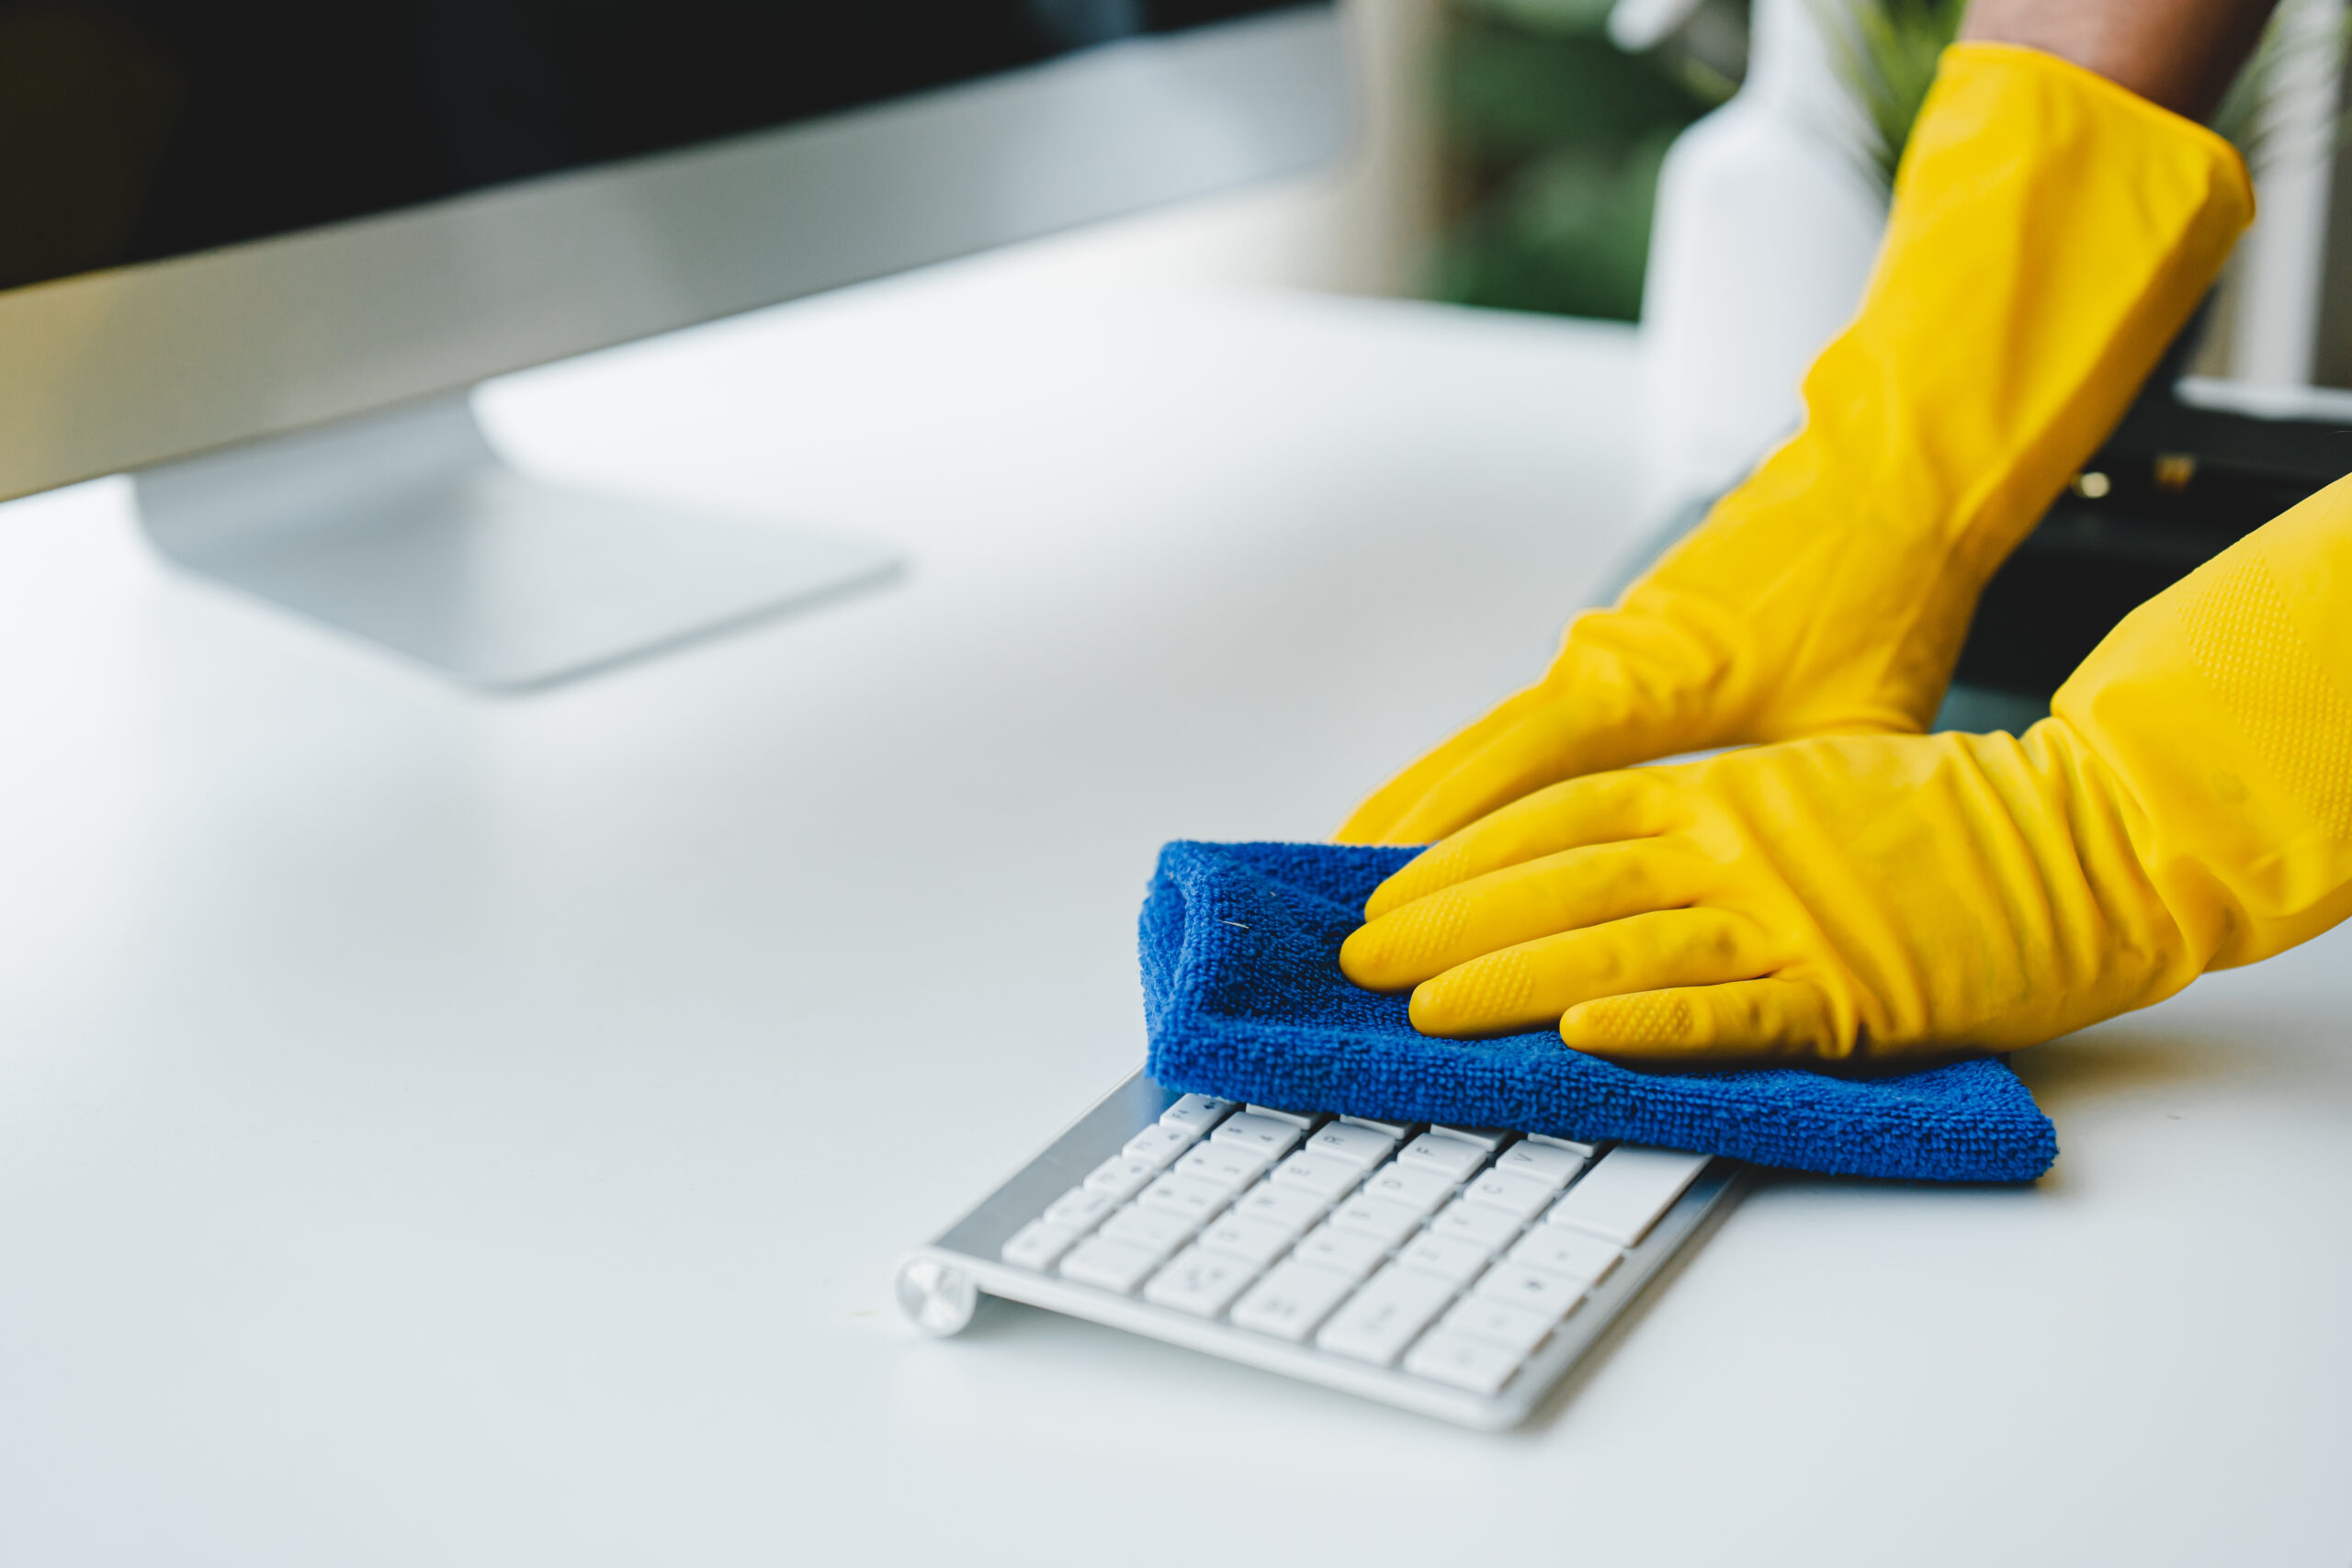 Commercial cleaning company in contra costa county. commercial cleaner cleaning corporate desk keyboard